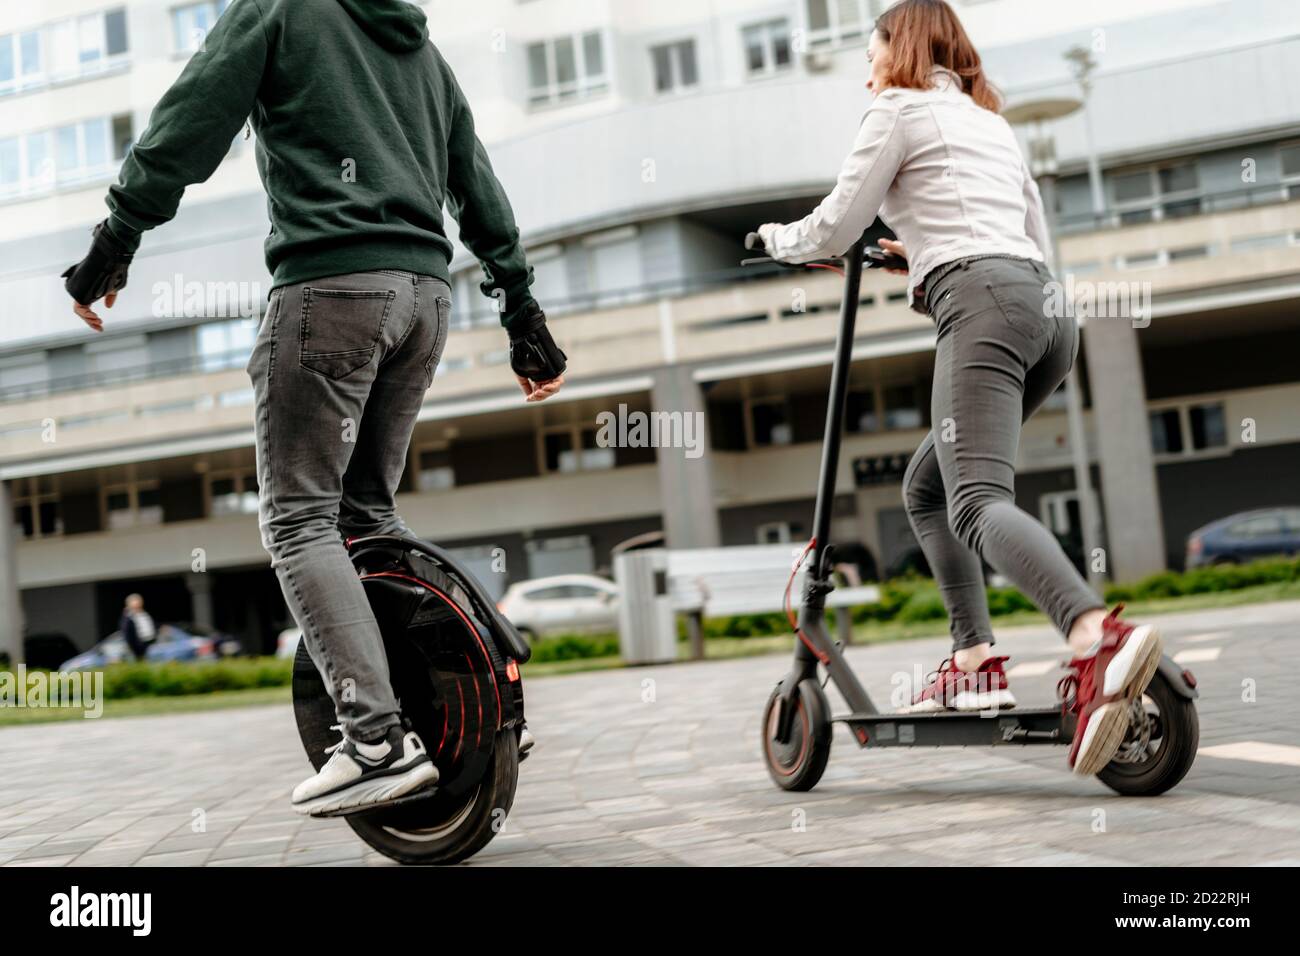 Young man riding unicycle and young woman in casual wear riding on electric kick scooter on city street Stock Photo